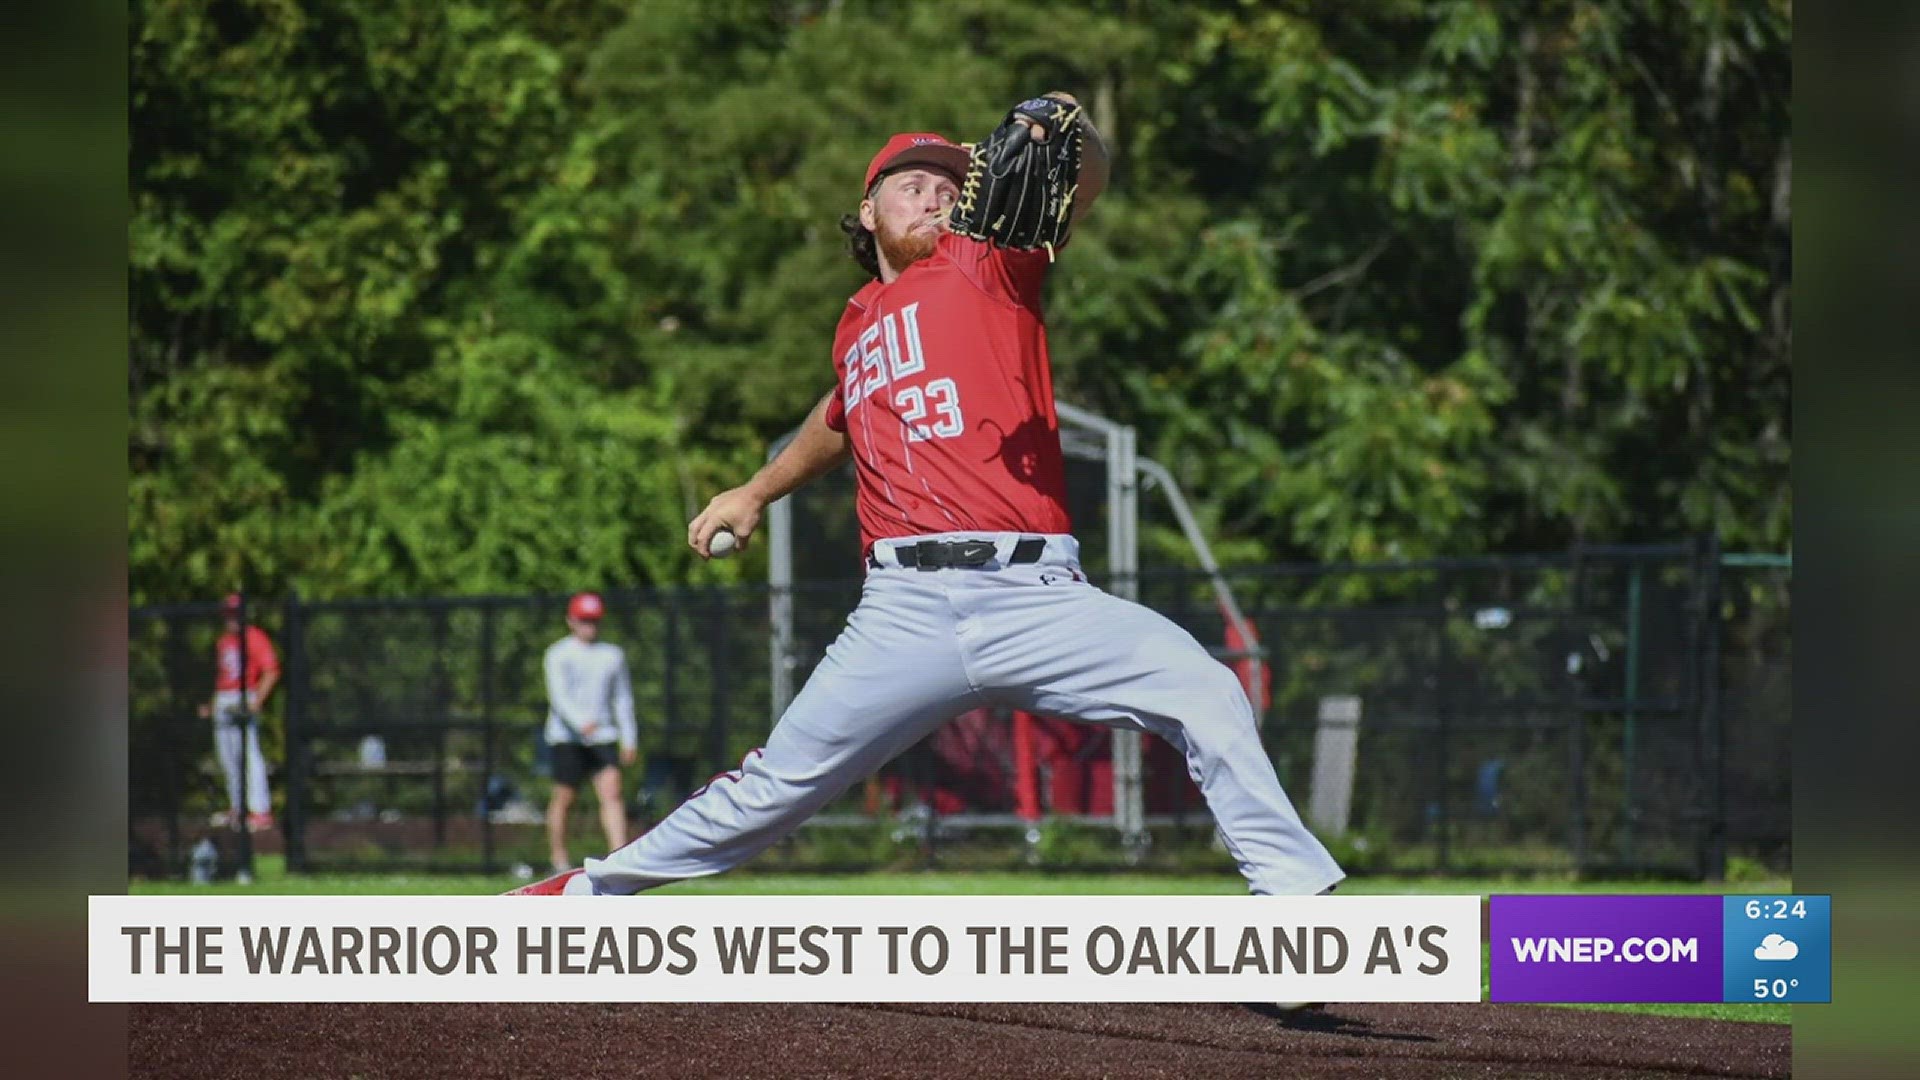 Right handed pitcher drafted by the Oakland A's in 10th round